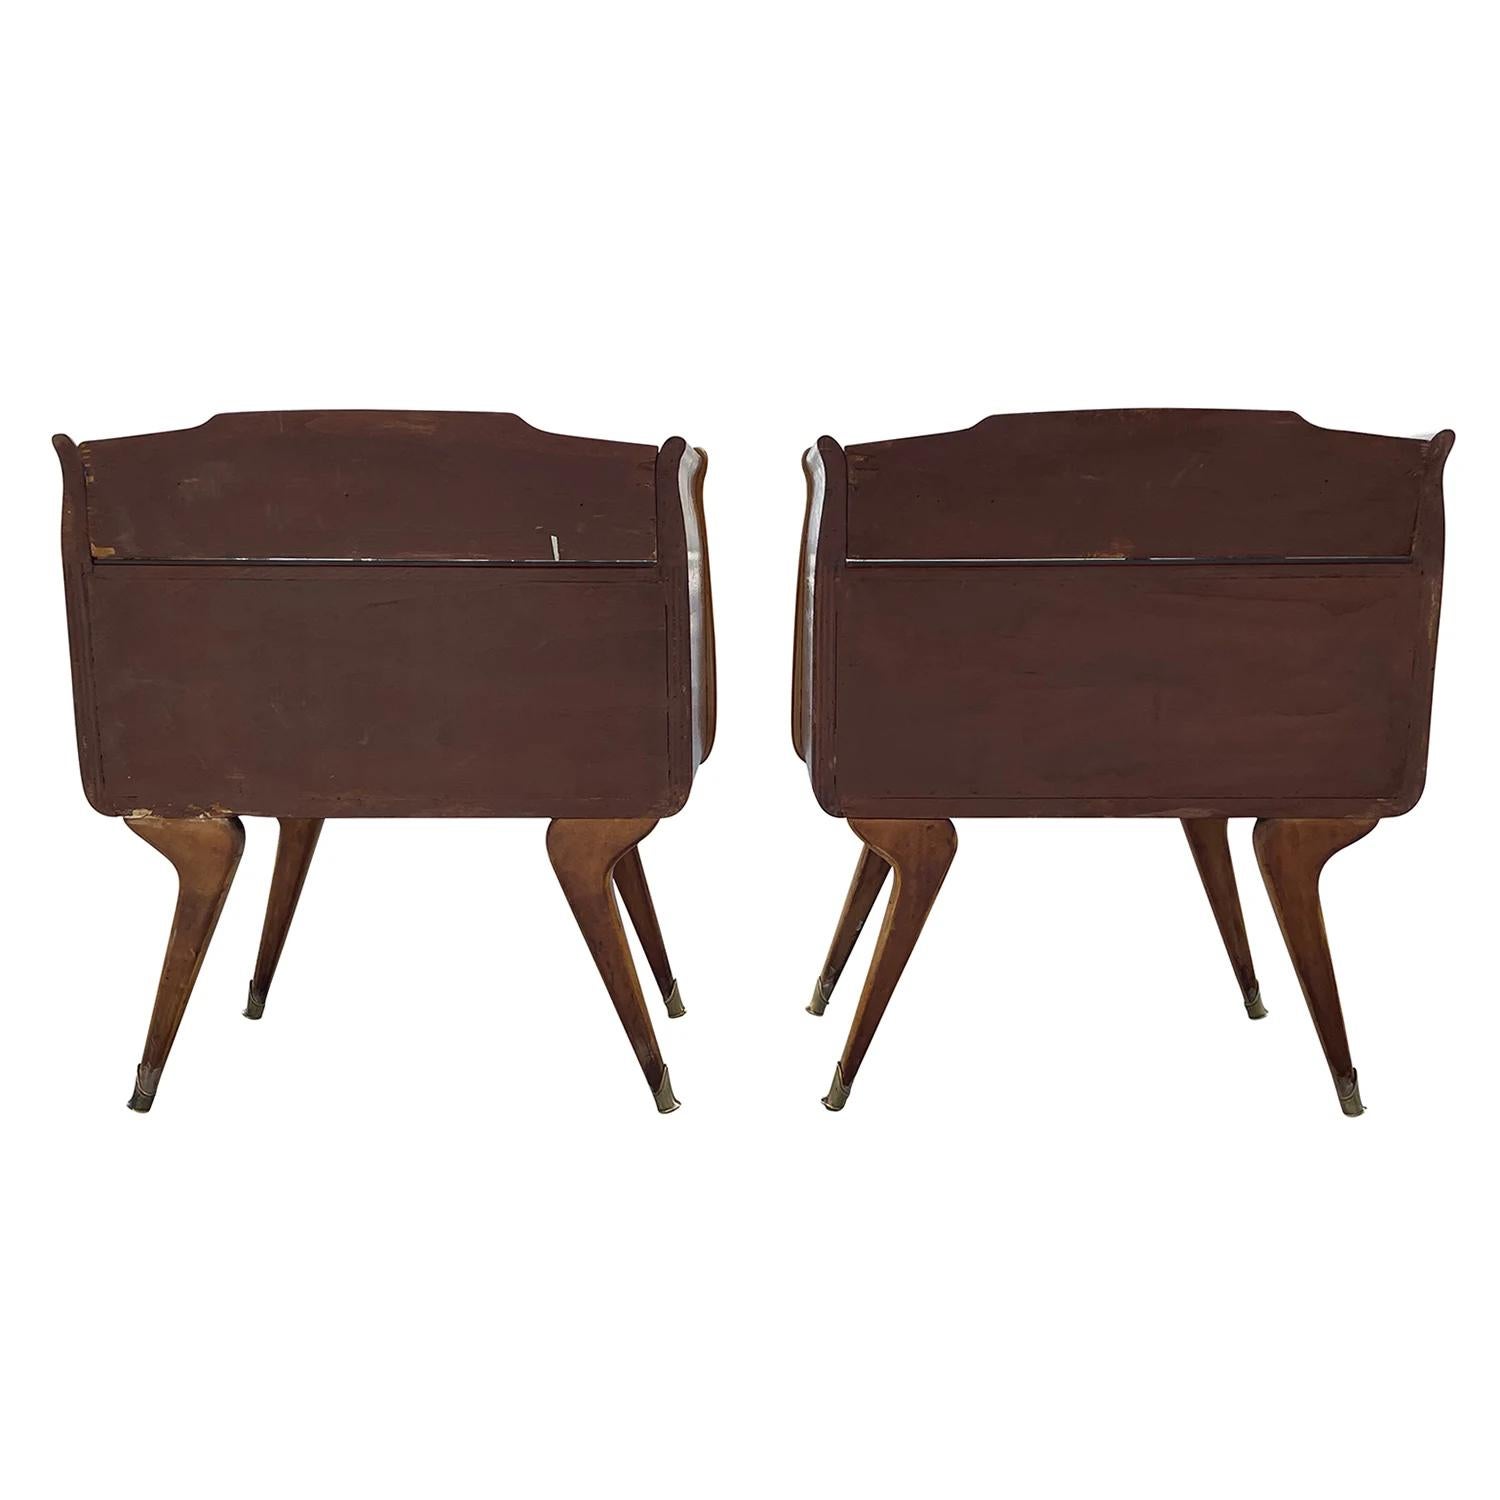 20th Century Italian Pair of Mid-Century Maplewood Nightstands by Paolo Buffa For Sale 3